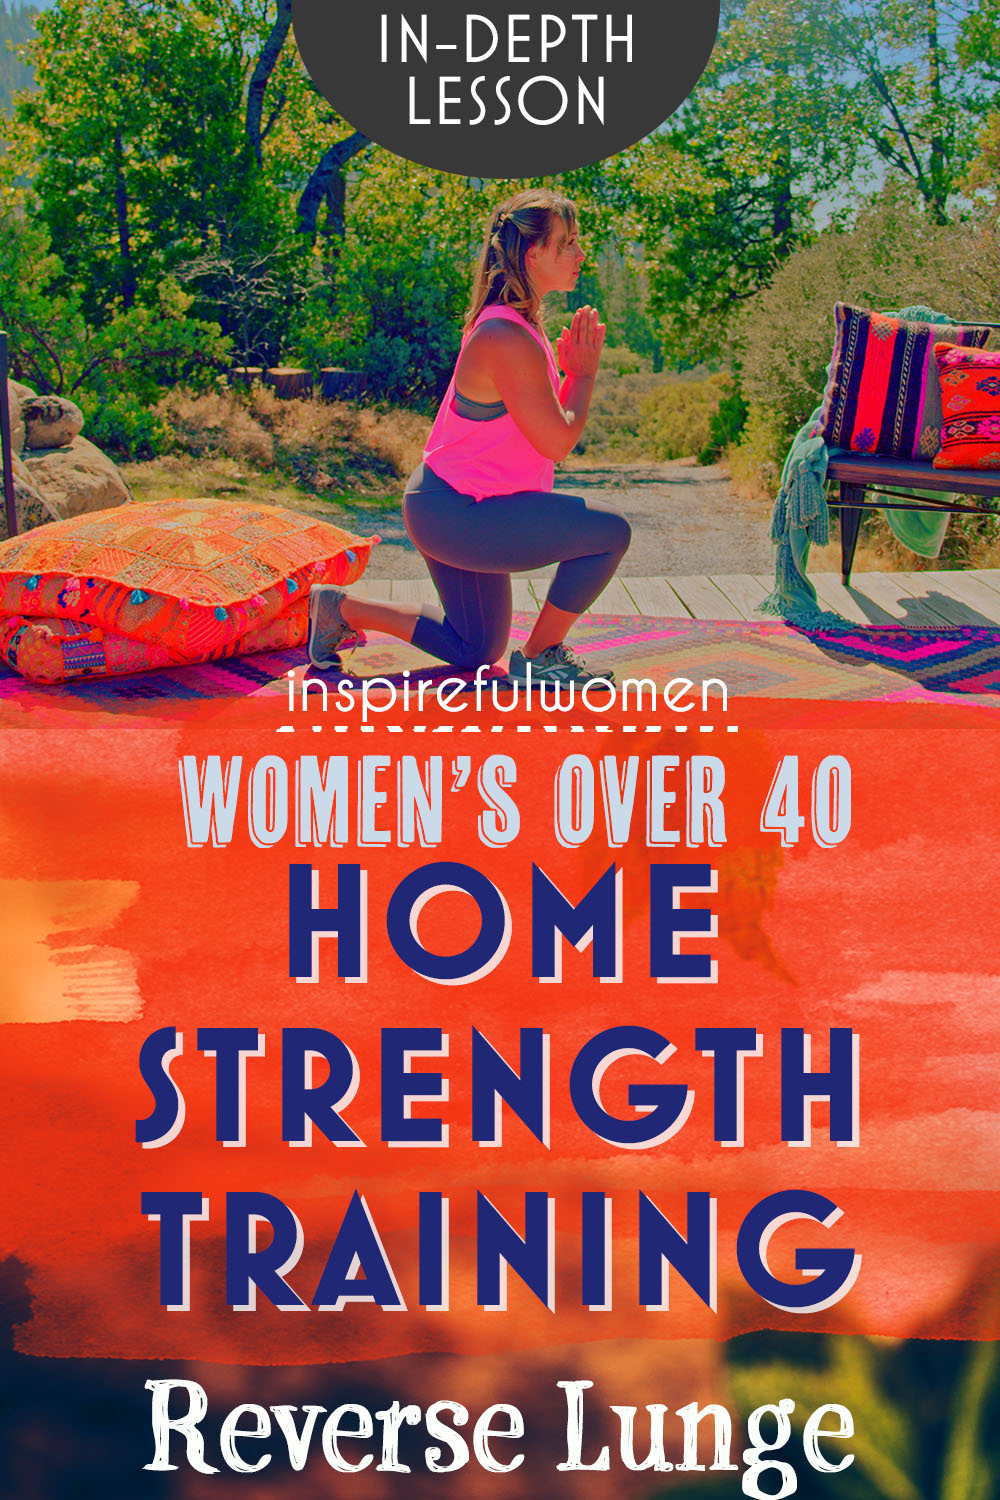 reverse-lunge-squat-for-bad-knees-glutes-quadriceps-stability-exercise-at-home-women-over-40